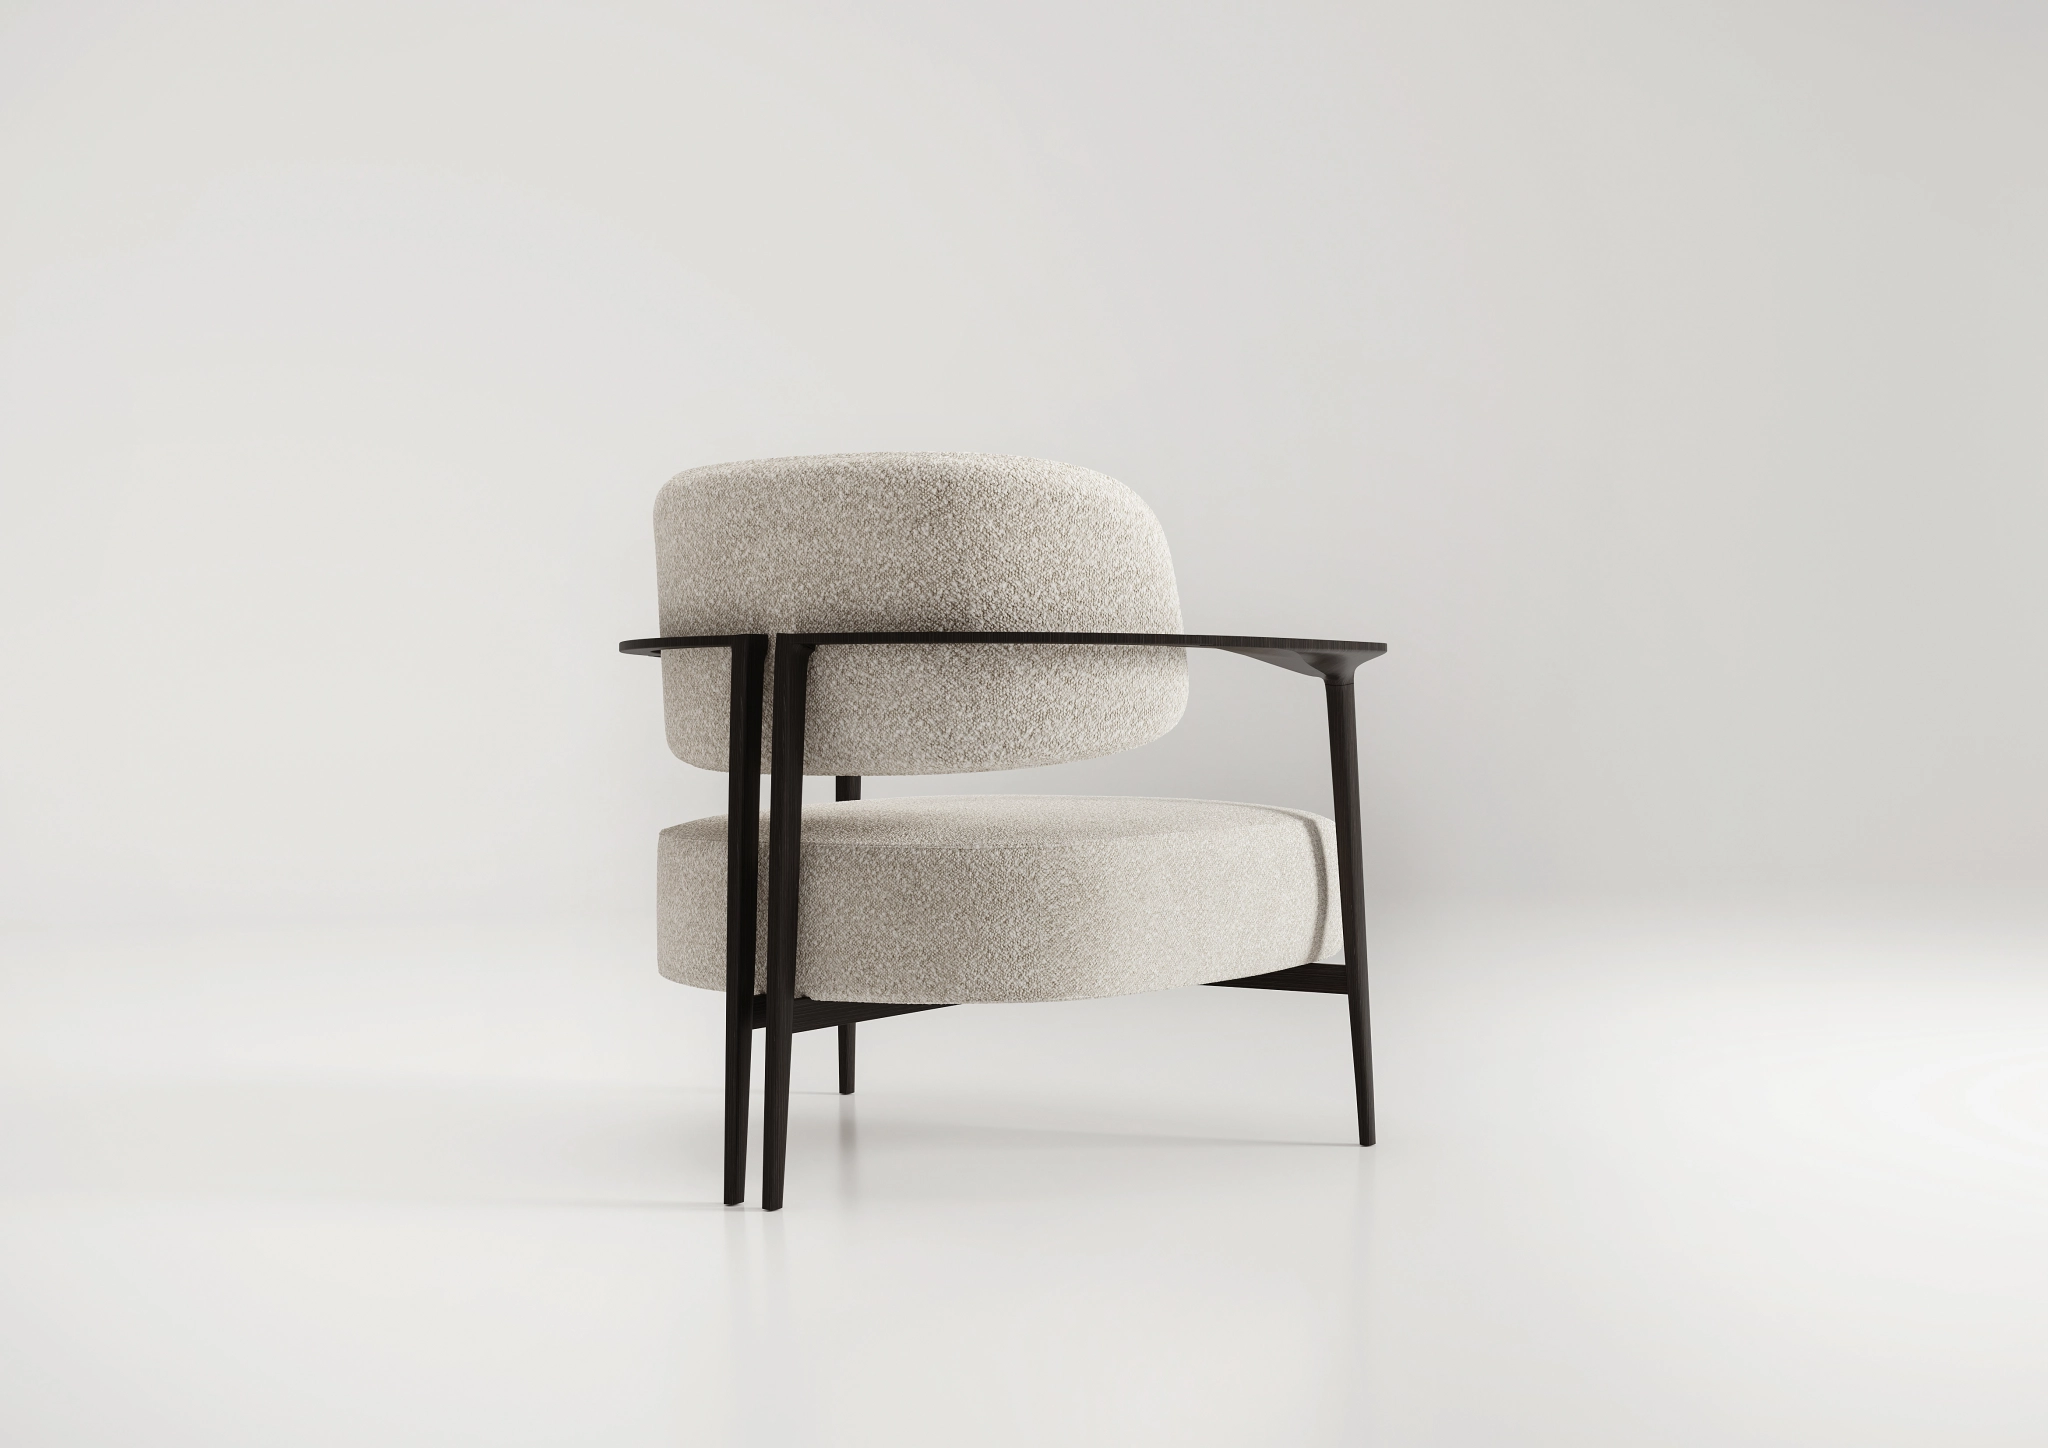 Karl Lagerfeld Maison Debuts Furniture Collection At Salone Del Mobile 2023